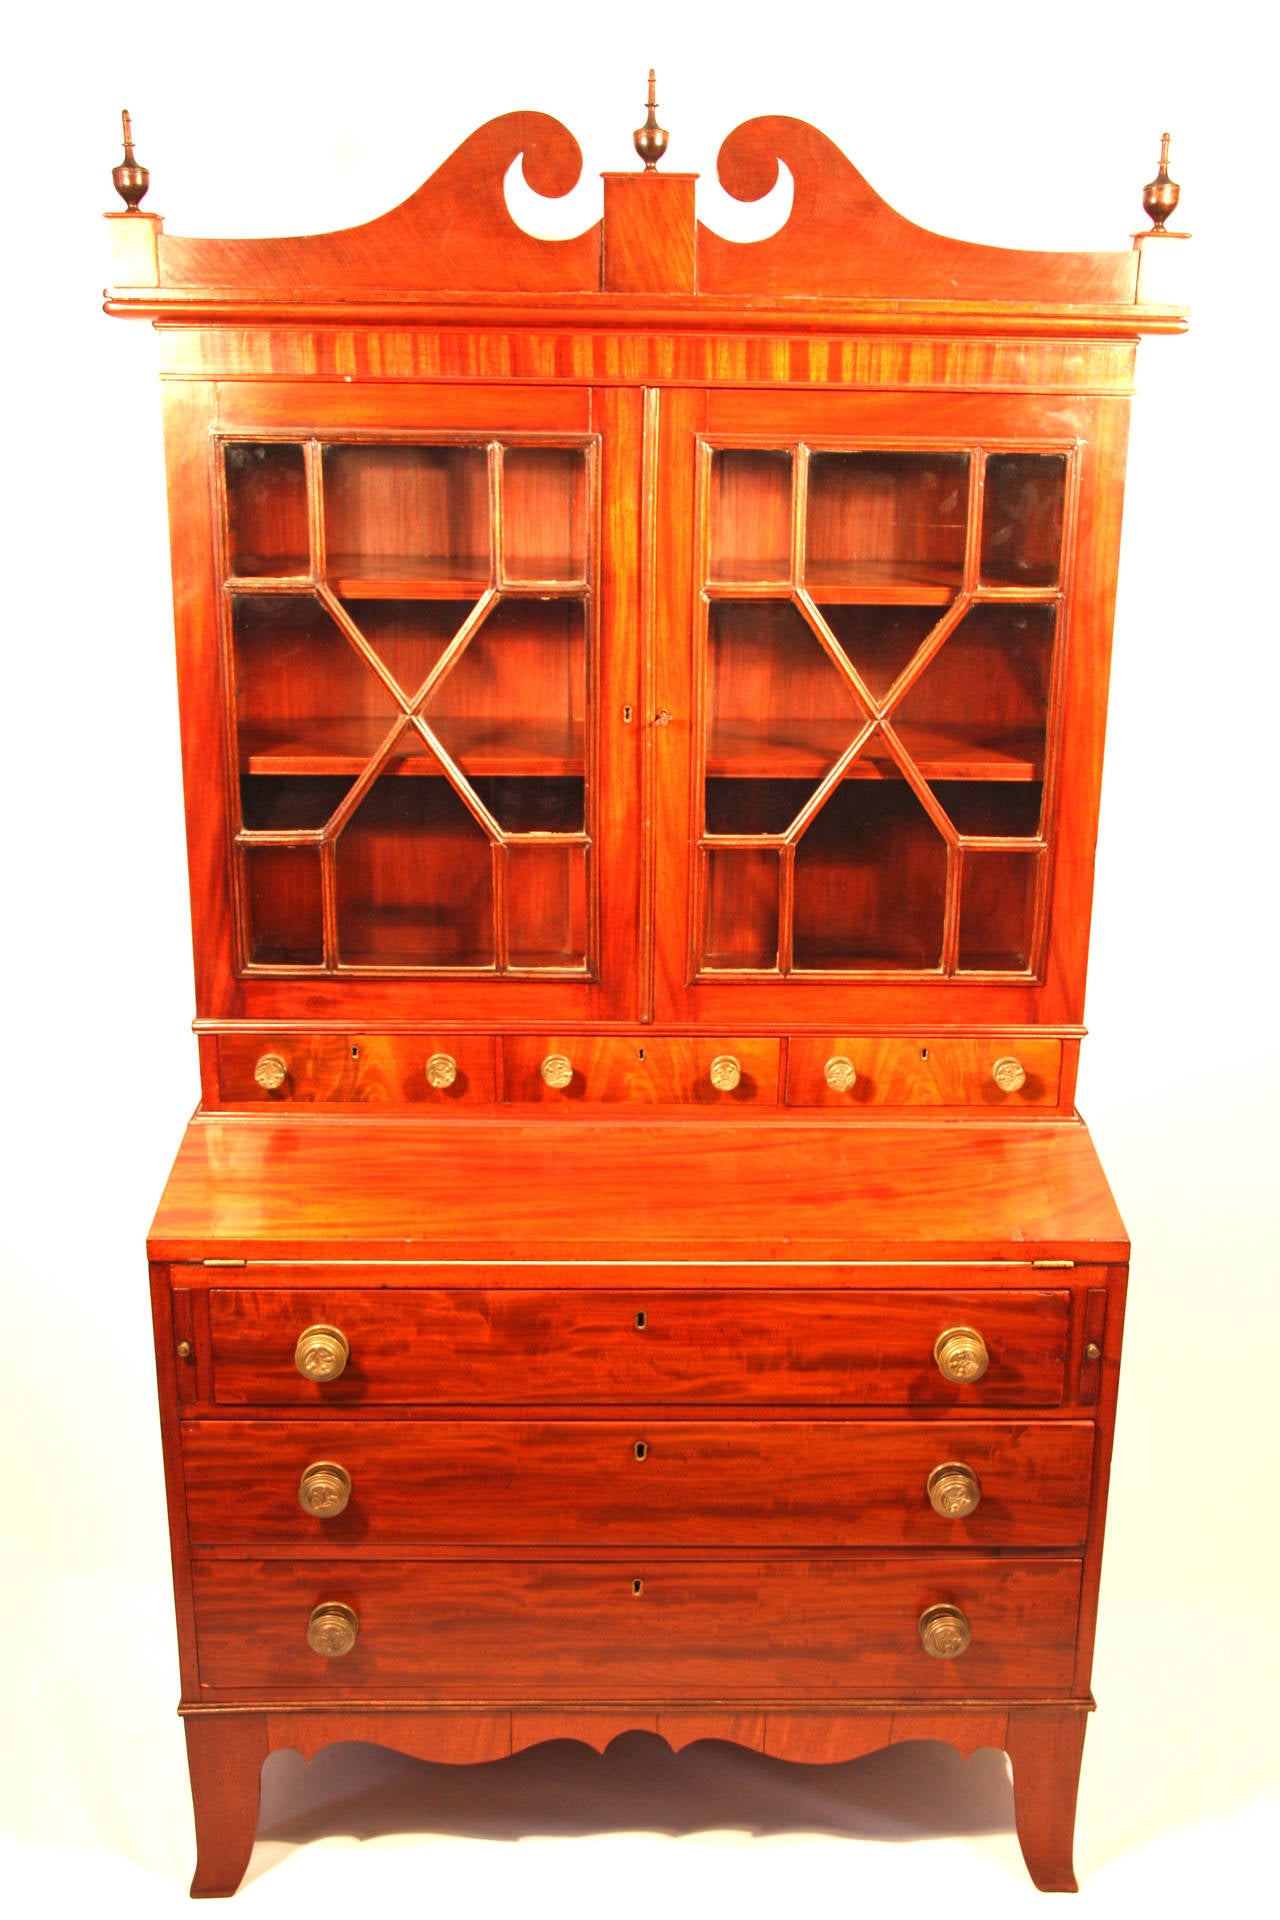 Hepplewhite mahogany secretary constructed in two parts having a scrolling arch top with plinth and finial center and ends above two multi-light doors fitted with a row of three small drawers. The base having a flip lid with two pull-out supports